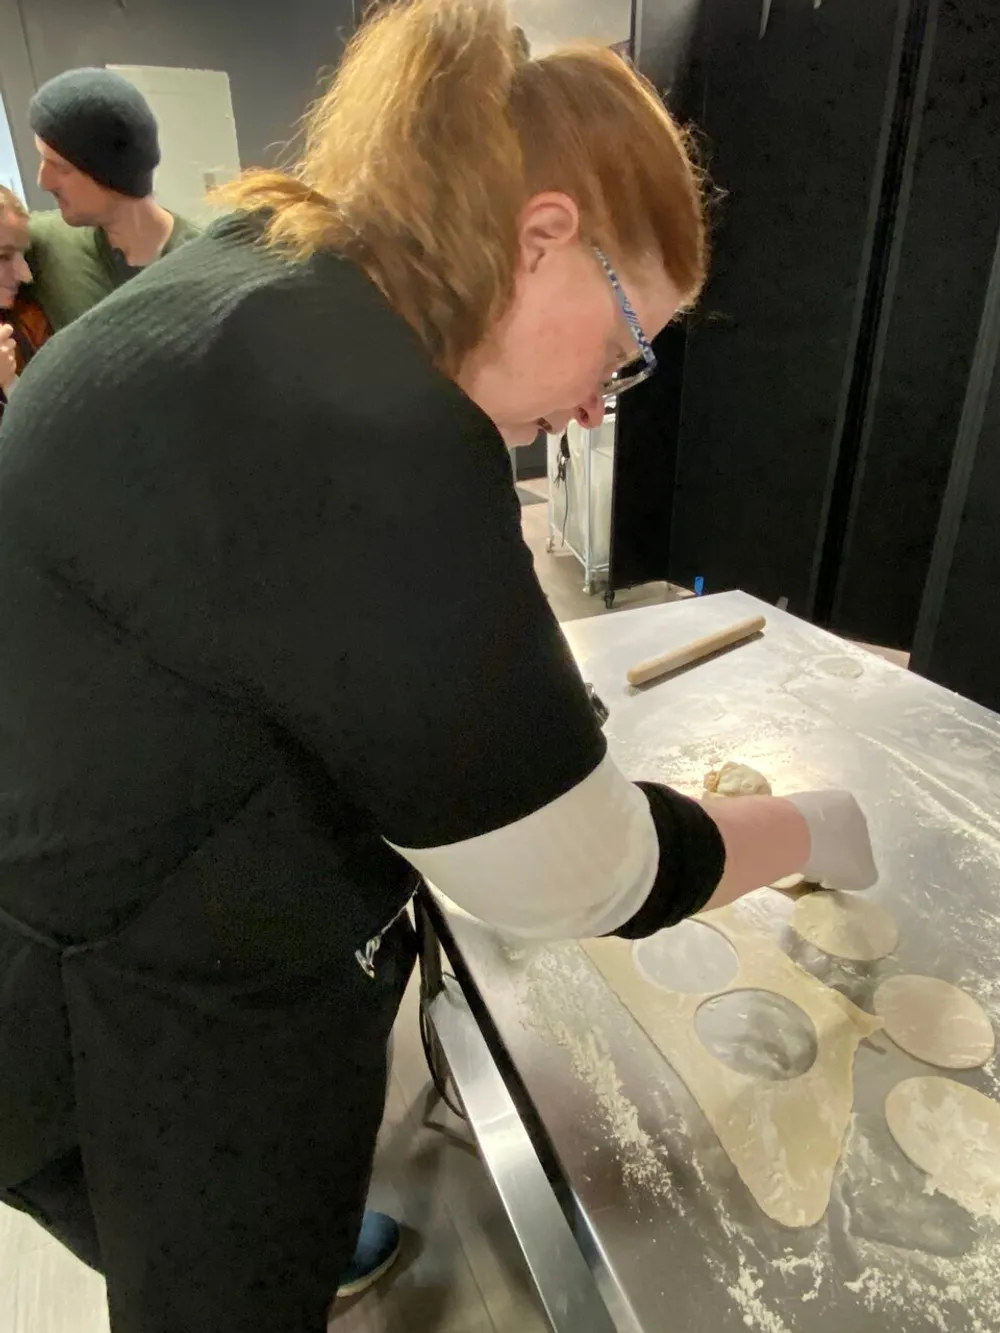 A person is focused on rolling out dough on a floured surface possibly making pastry or pasta